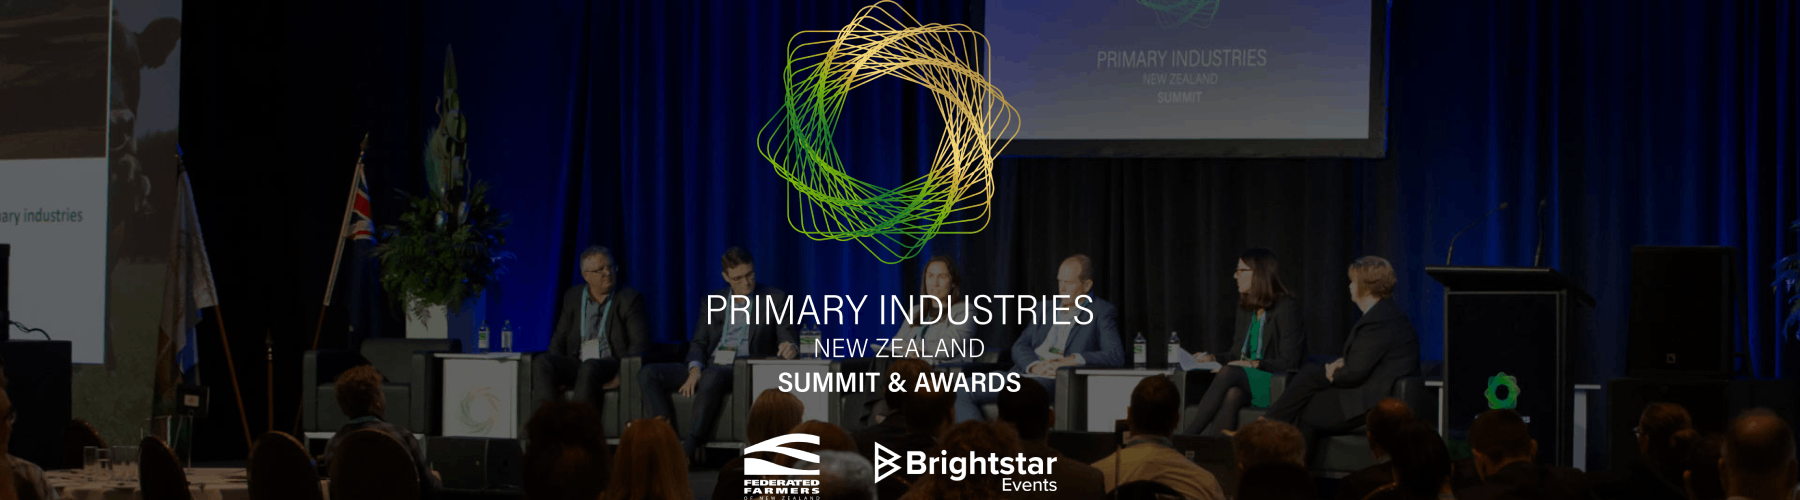 primary industry summit and awards